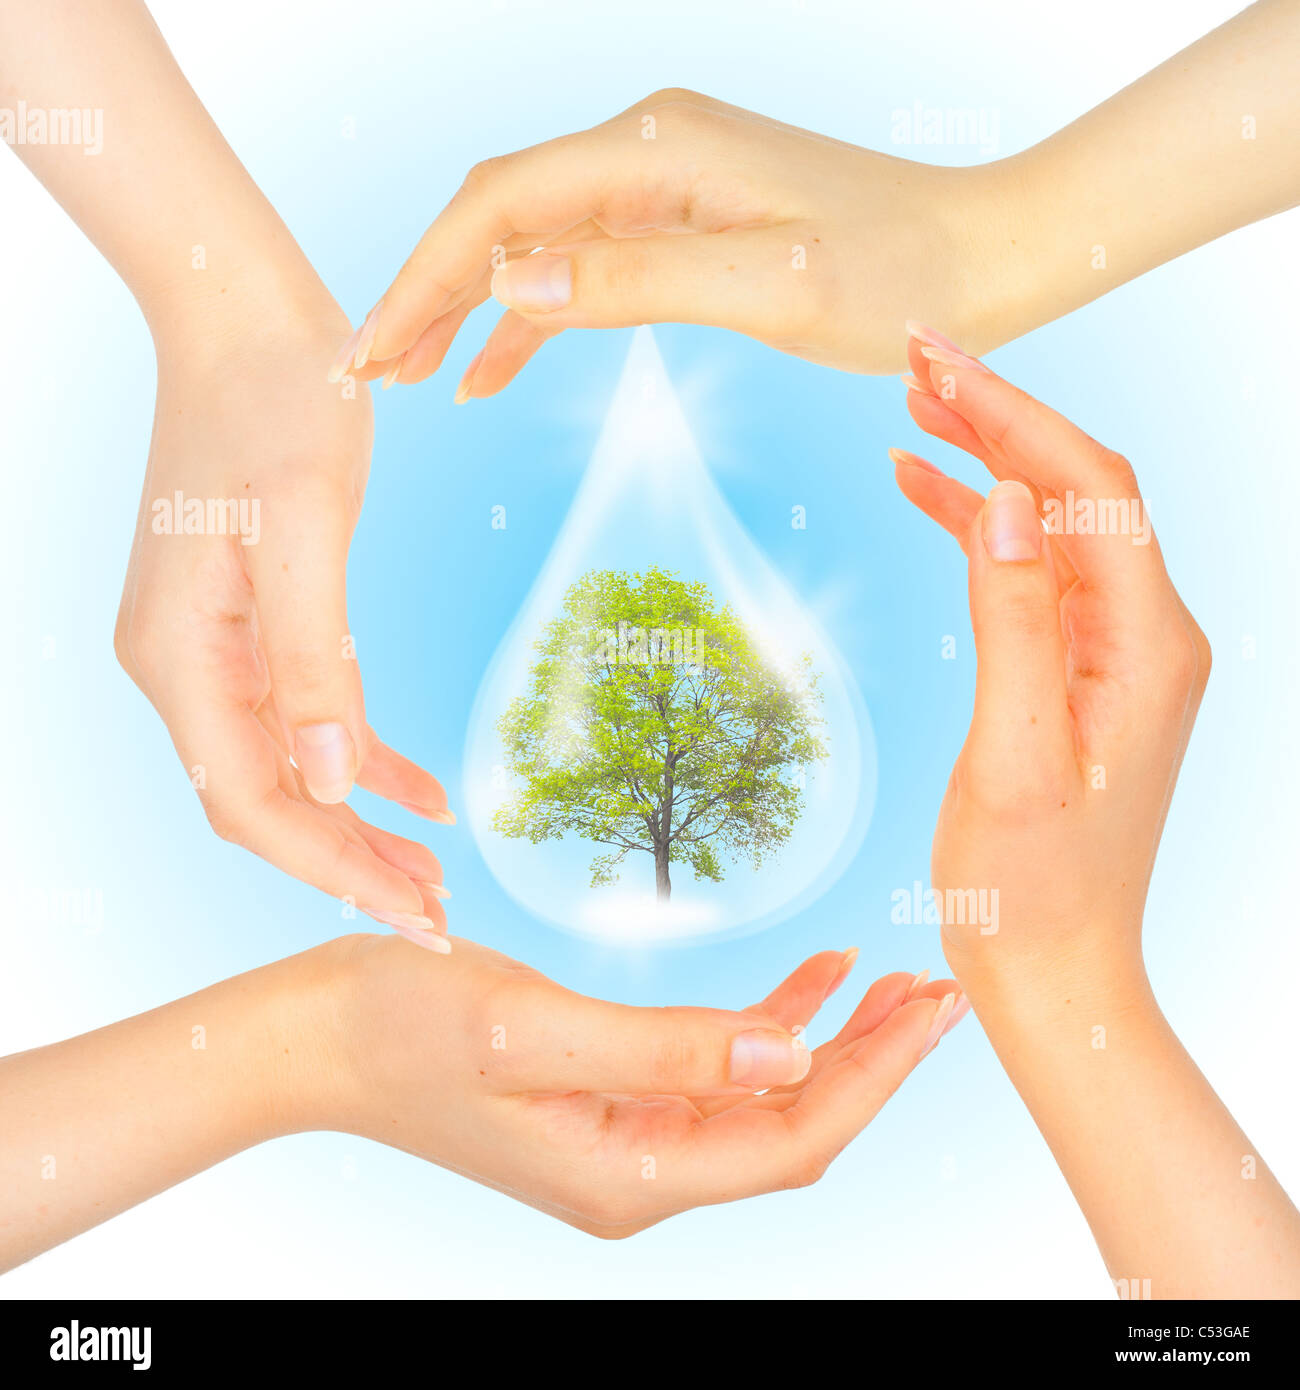 Drop of water with Tree inside and hands. The symbol of Save Green Planet. Stock Photo